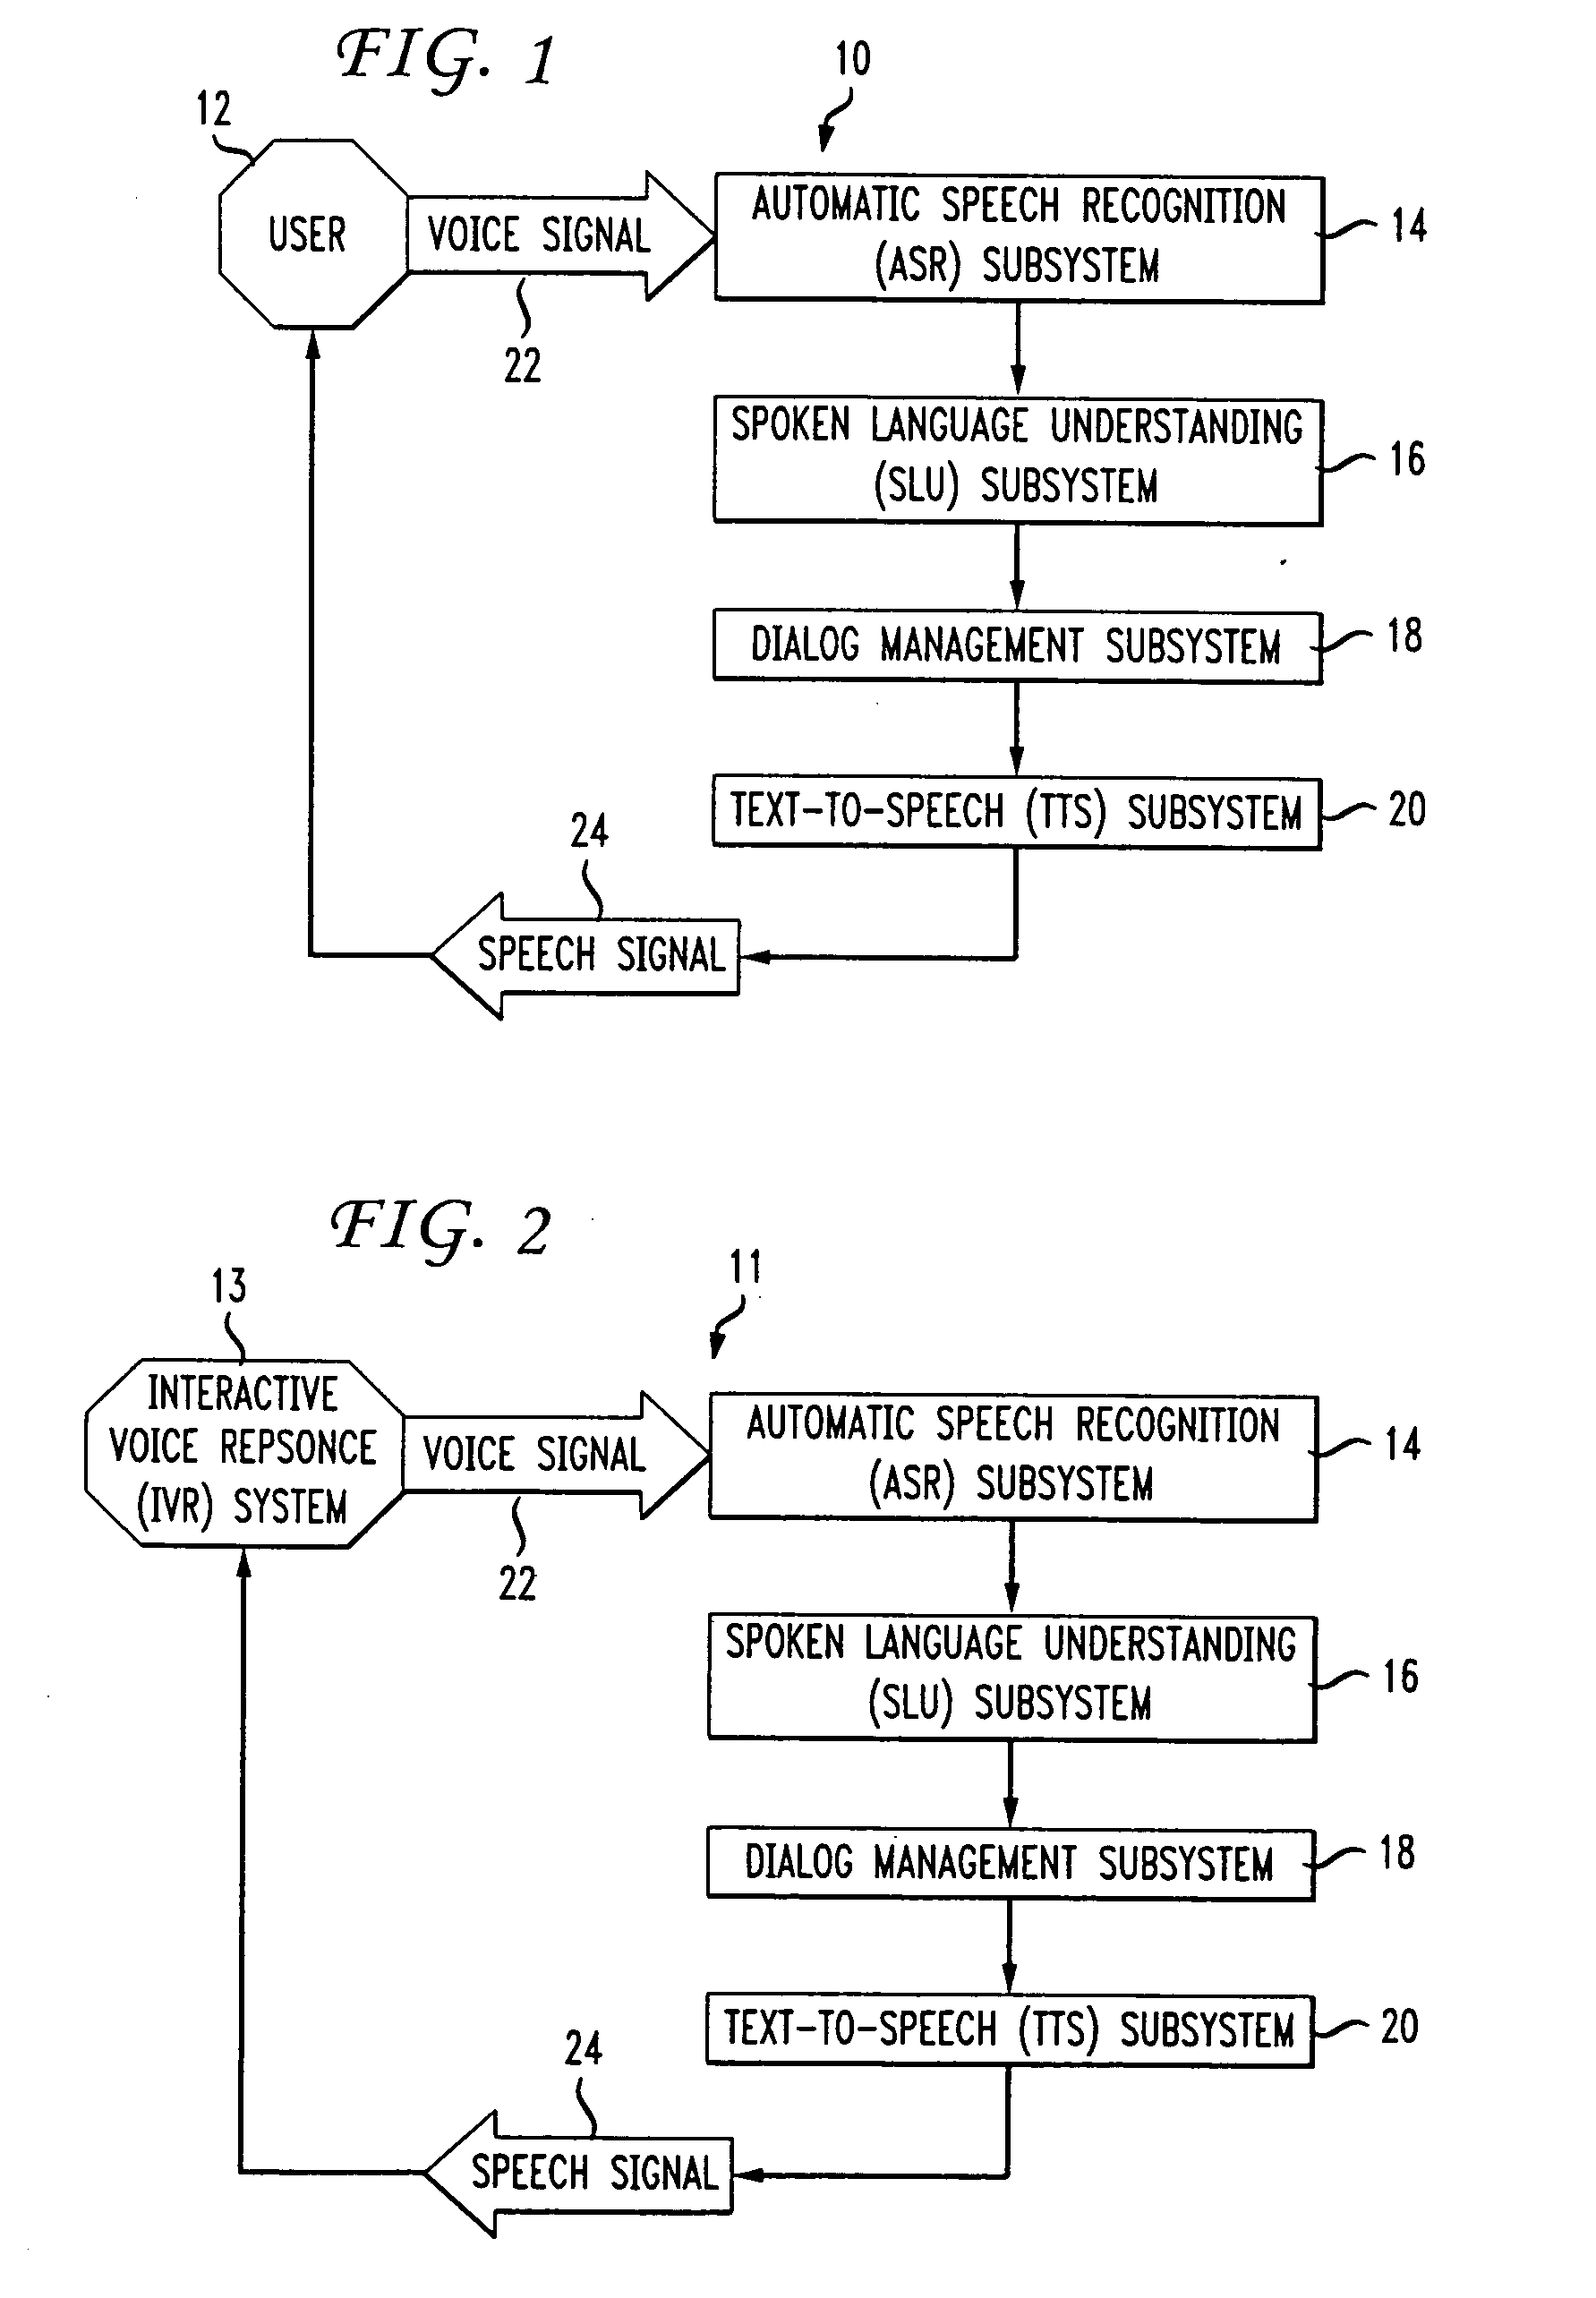 Method and apparatus for preventing speech comprehension by interactive voice response systems